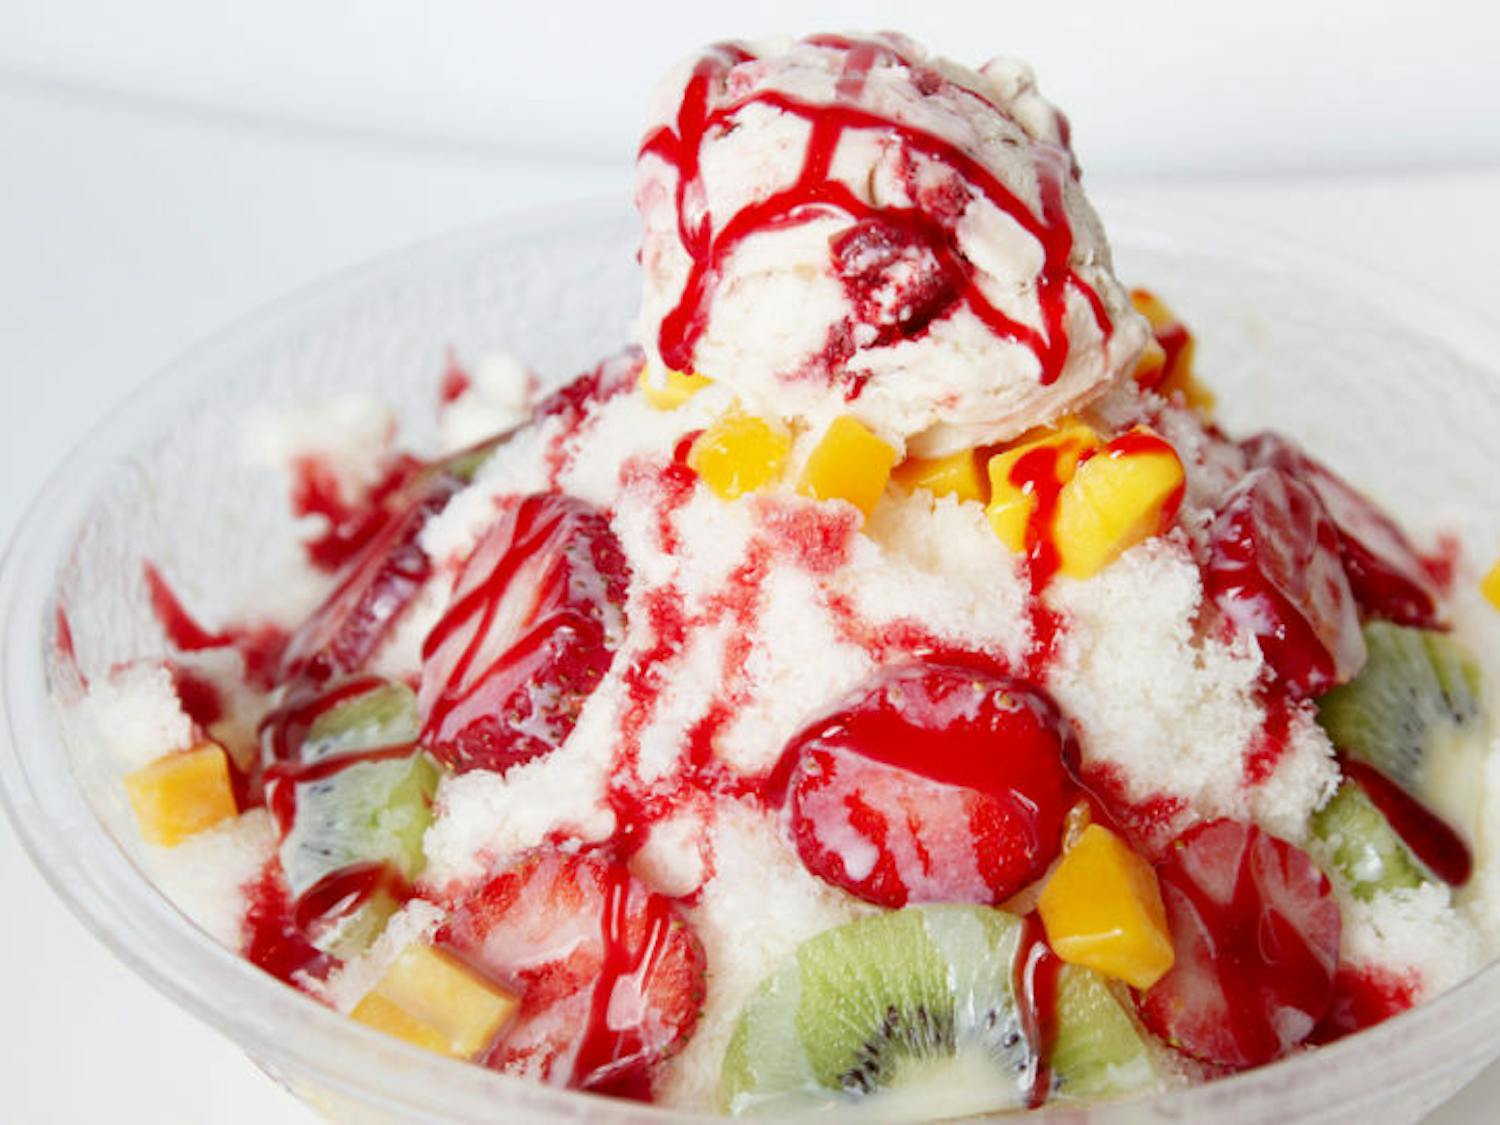 The snow bowl at Hiro Asian Sandwich Bistro combines ice cream and toppings with shaved ice.